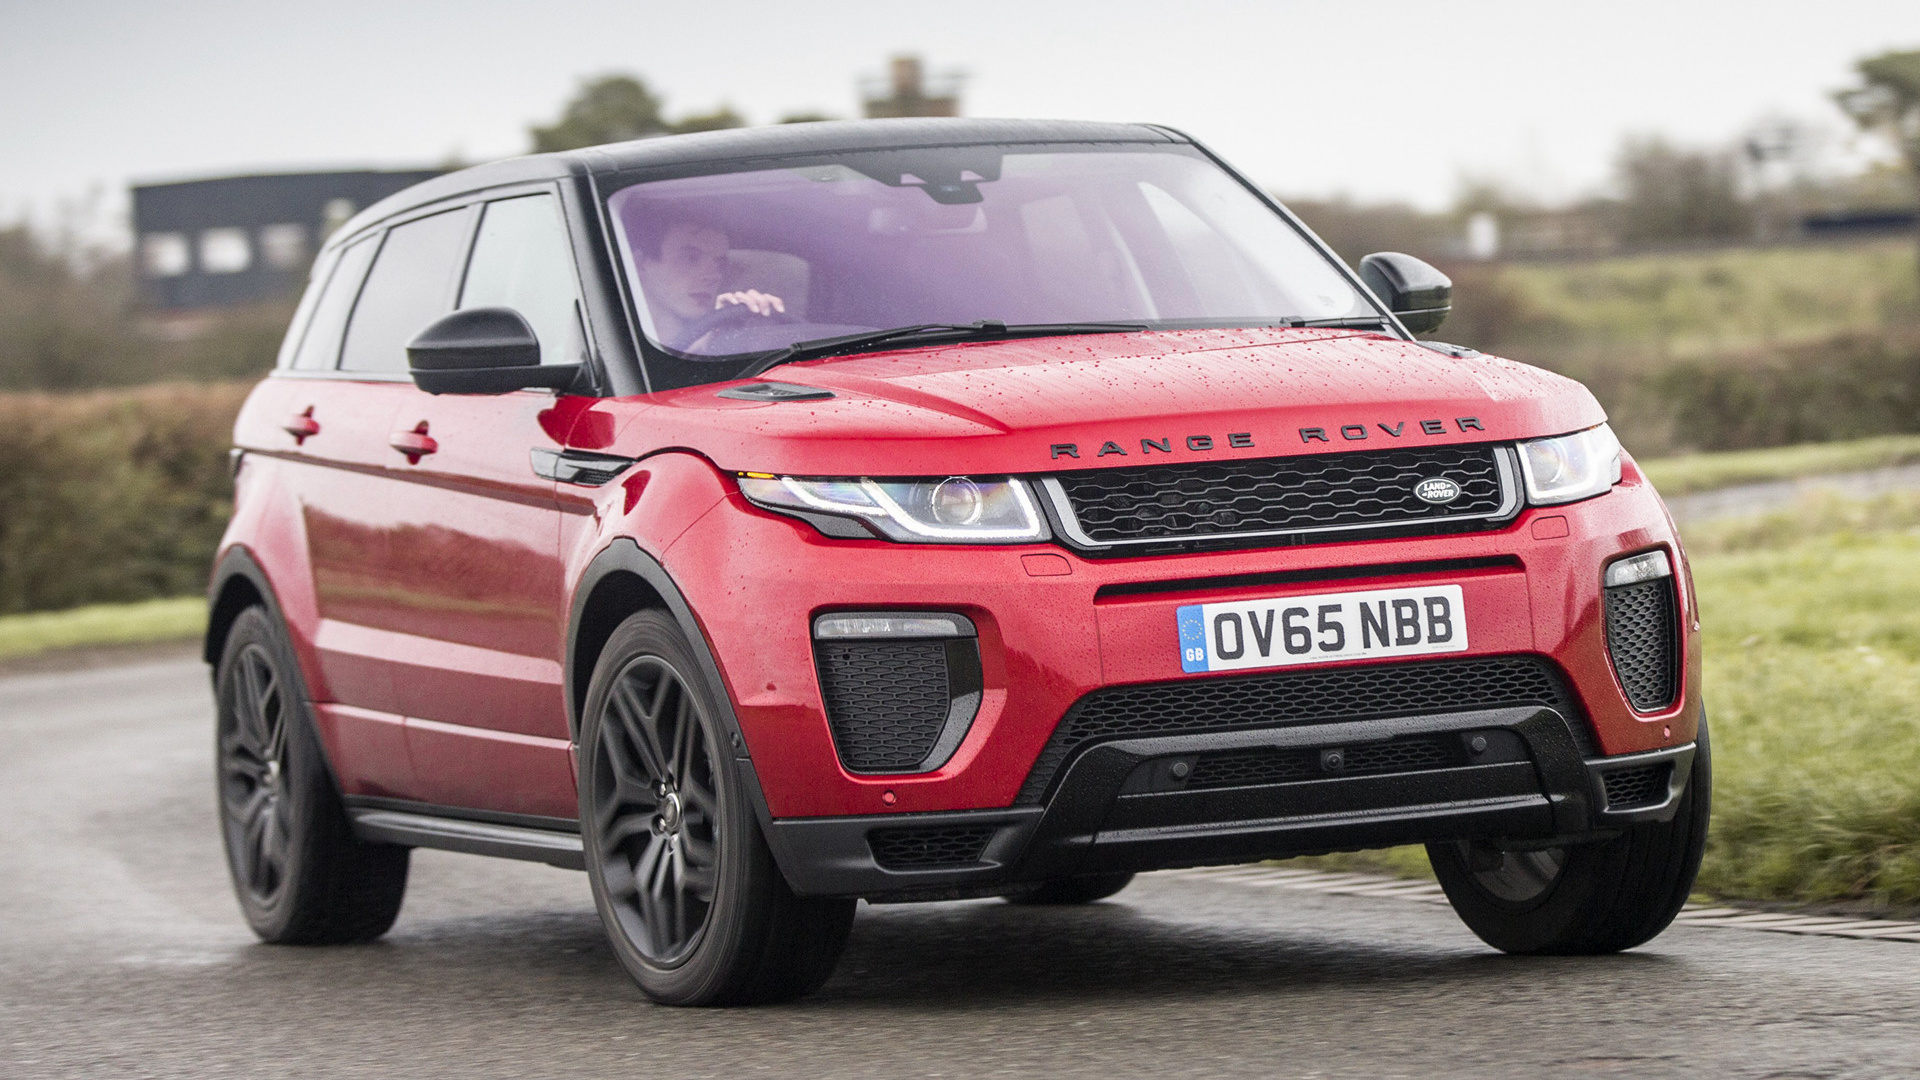 Range Rover Evoque Dynamic Hd - Compact Sport Utility Vehicle , HD Wallpaper & Backgrounds